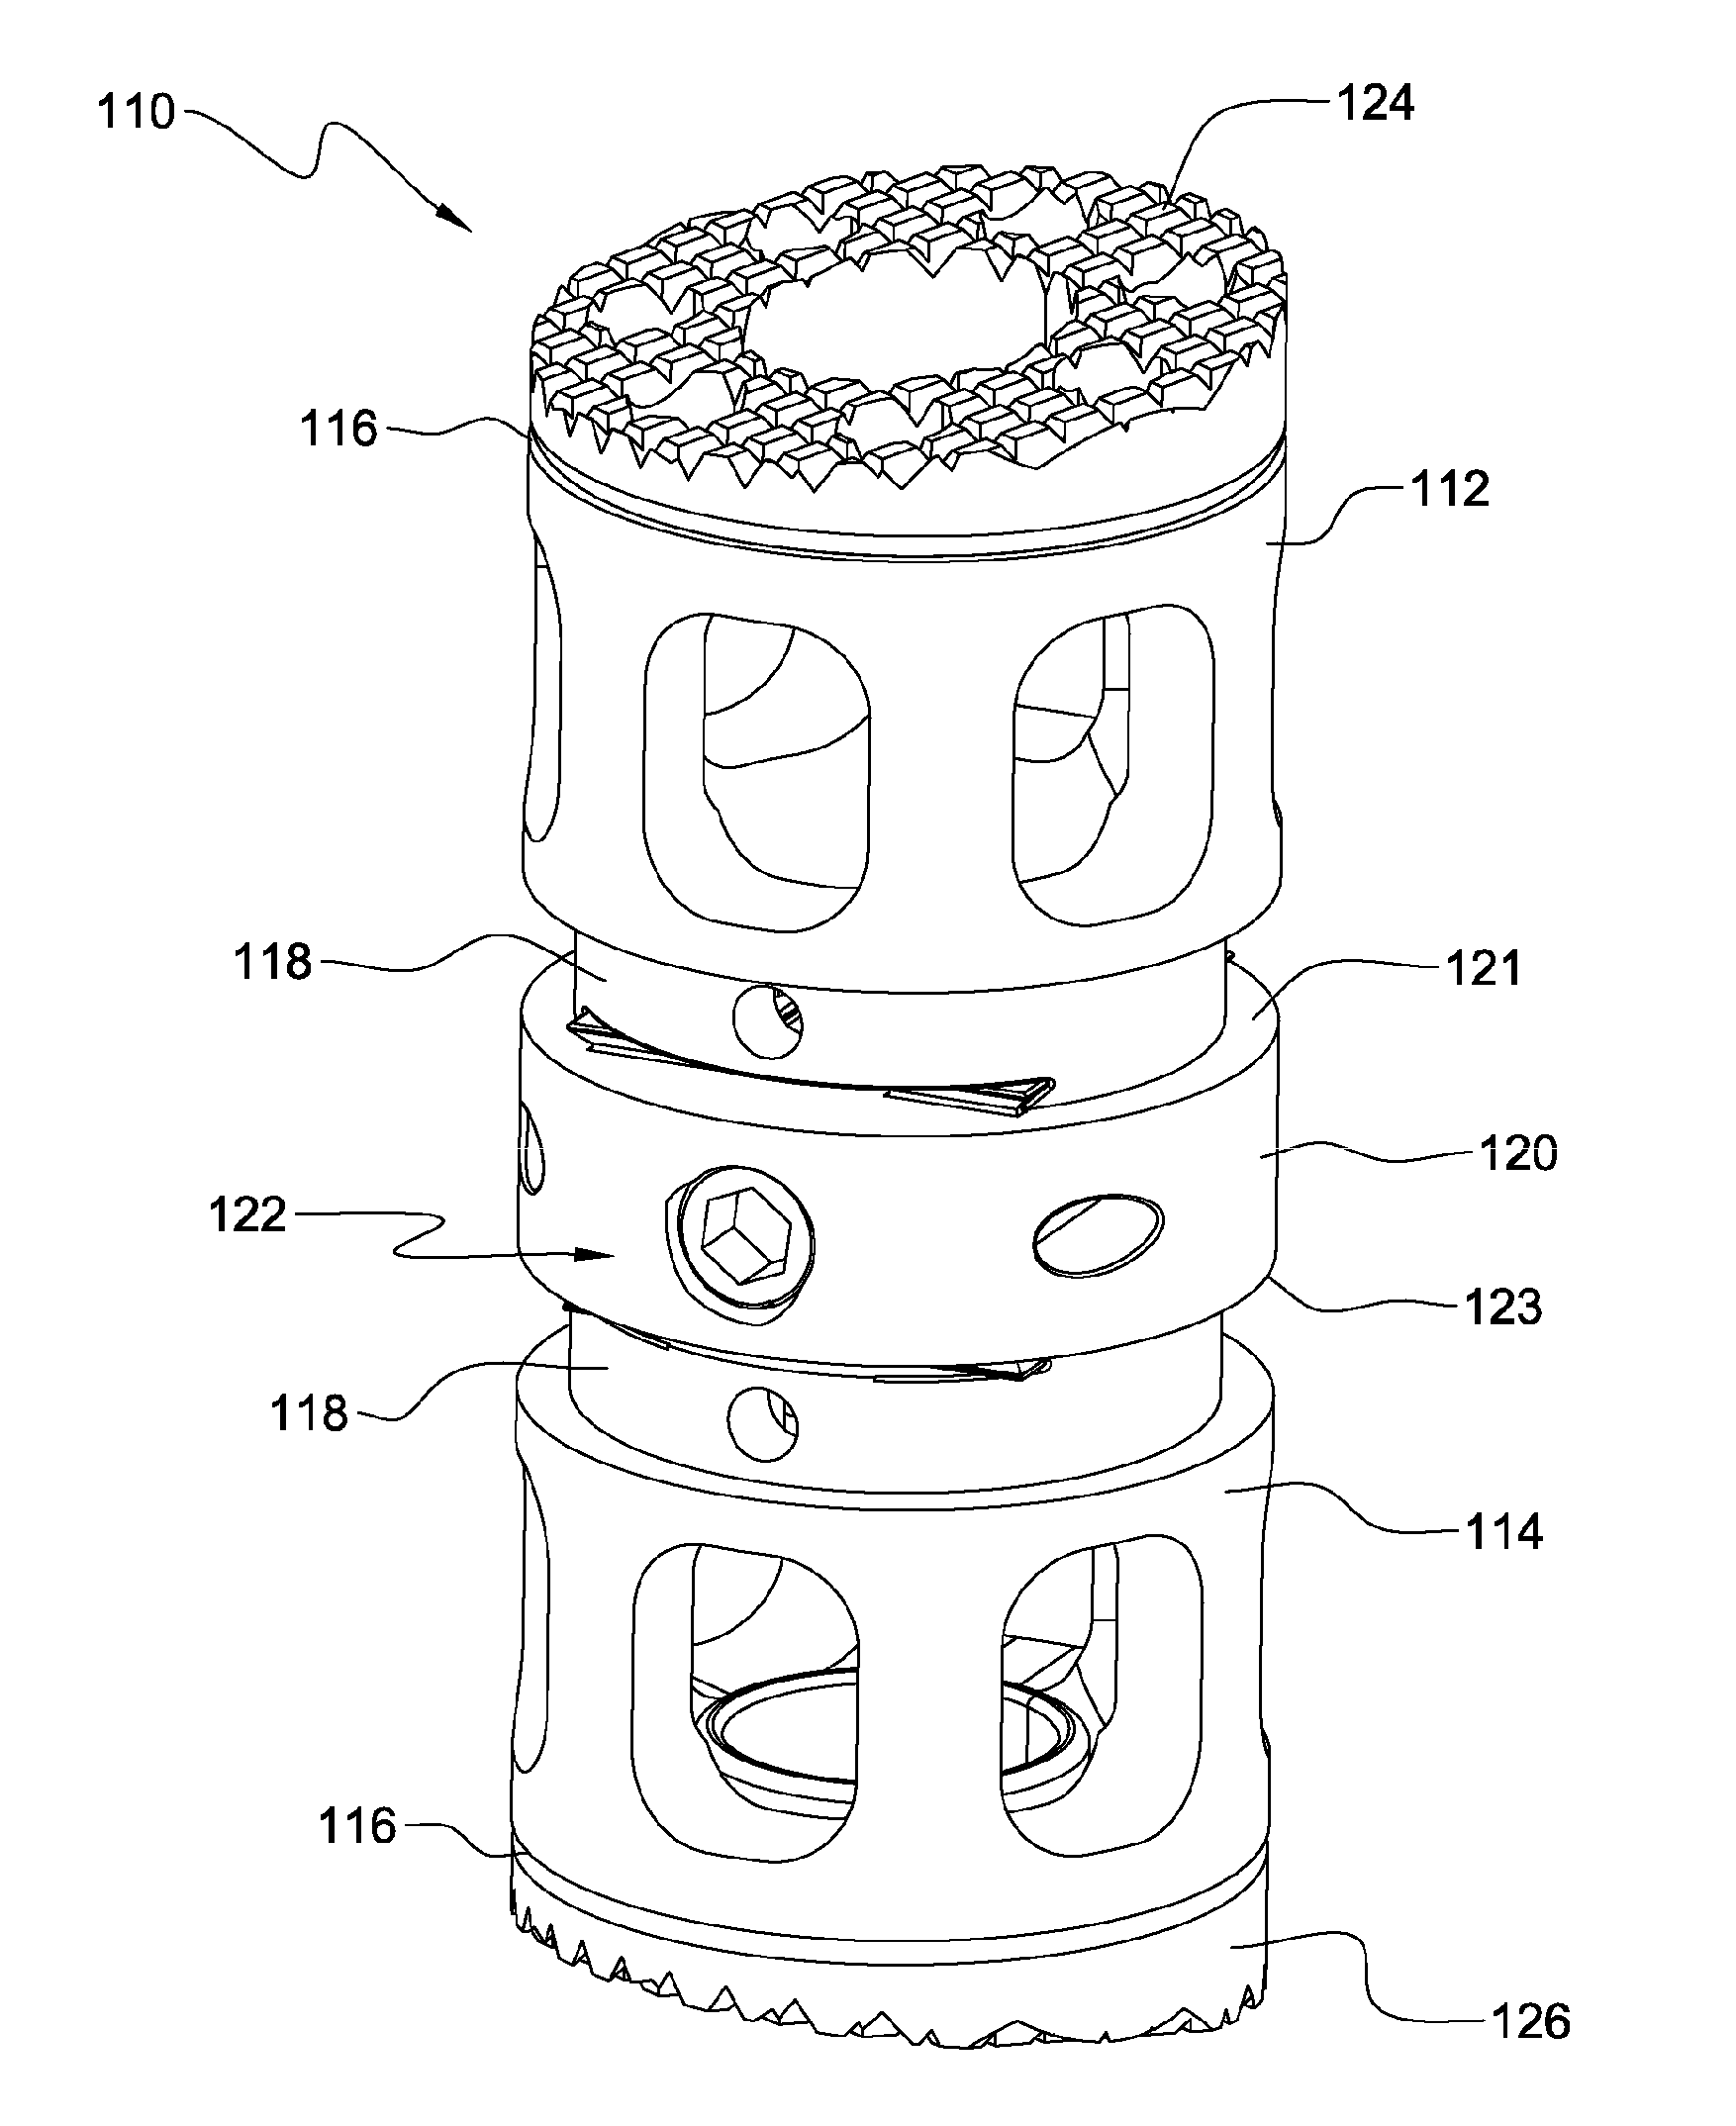 Tissue spacer implant, implant tool, and methods of use thereof